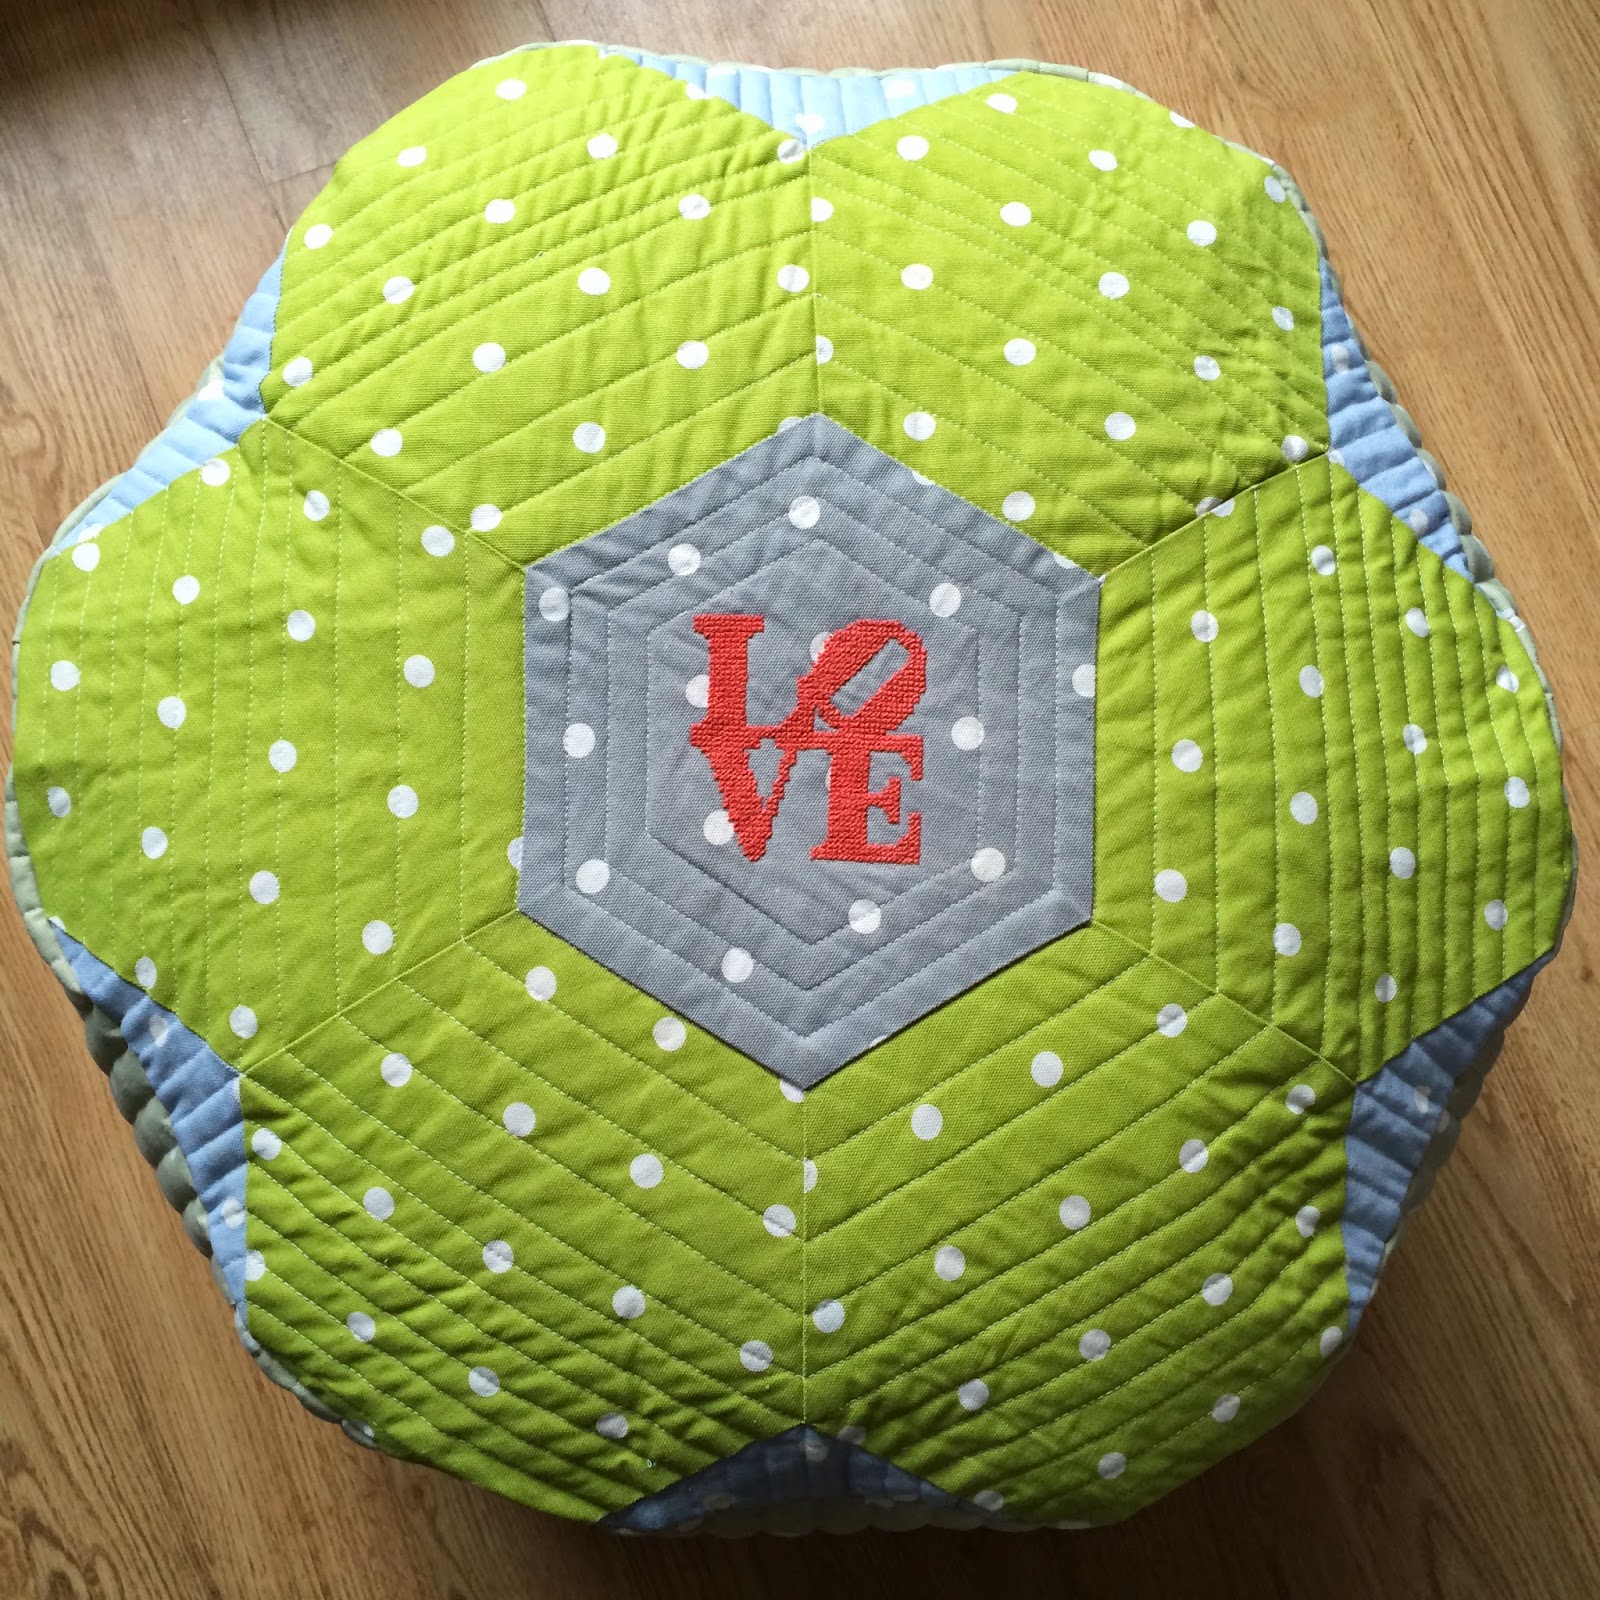 DIY Pouf Ottoman ~ Tutorial and Lessons Learned - Pretty Handy Girl